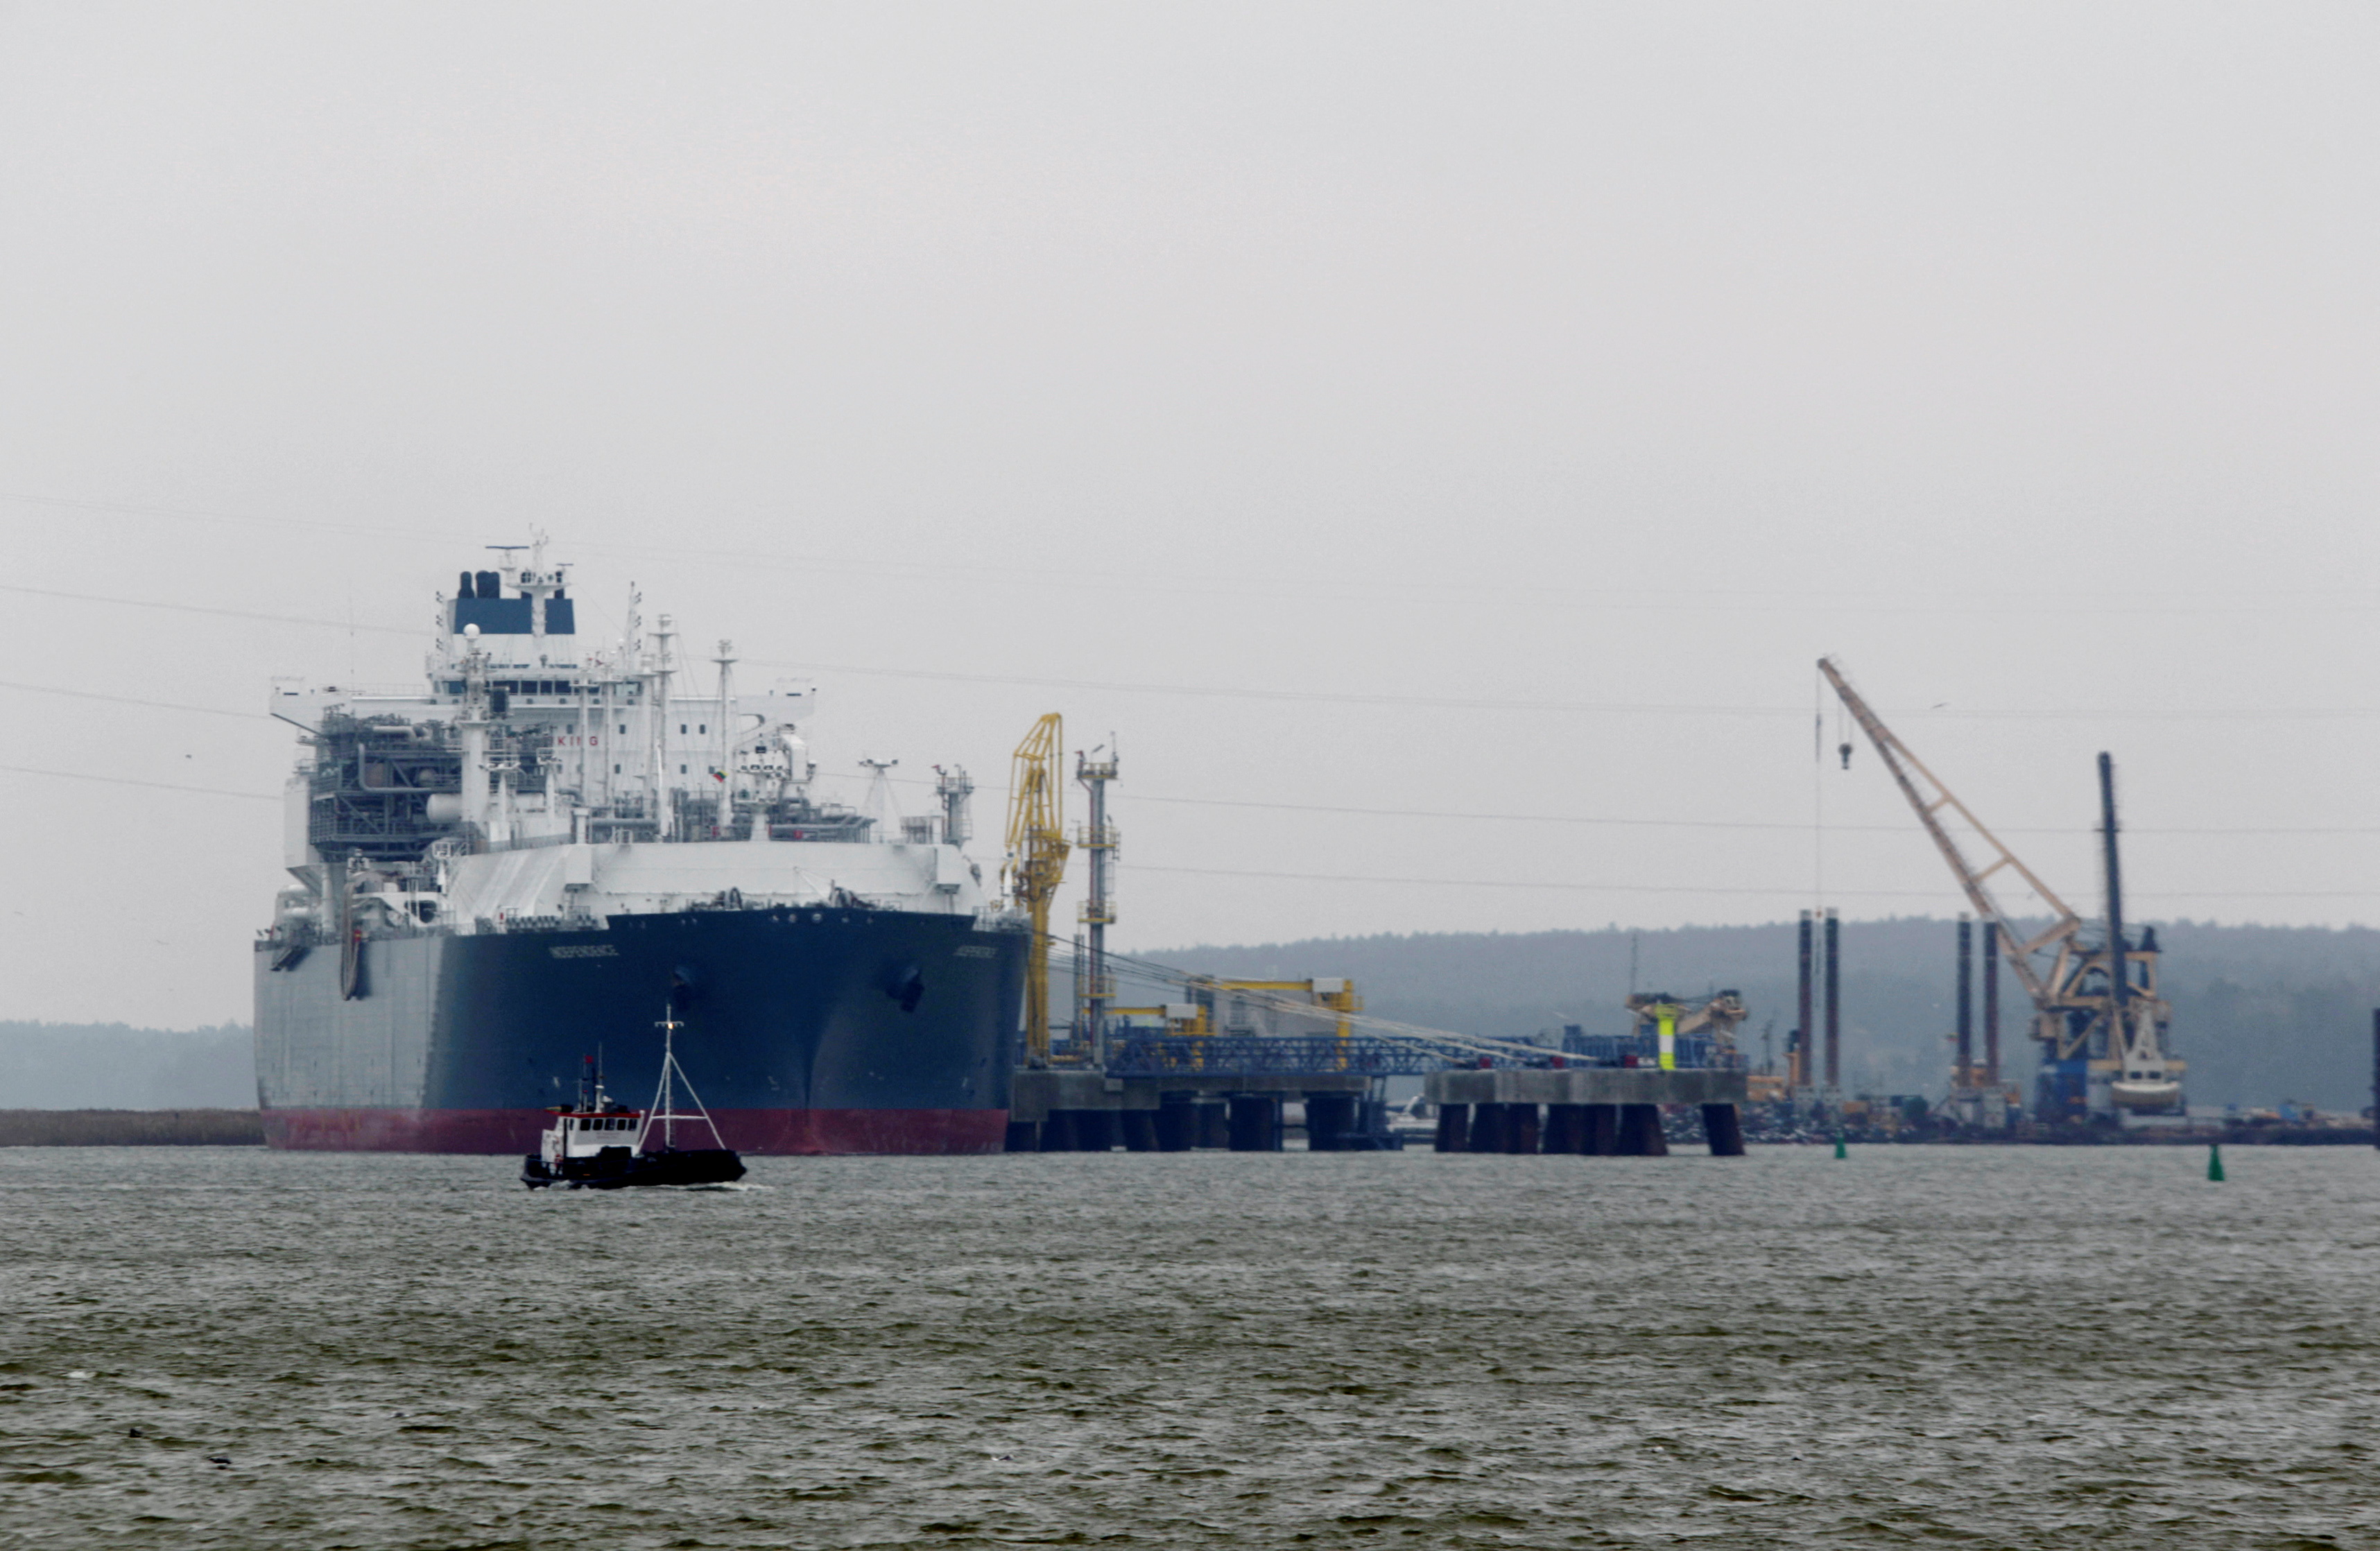 Floating storage regasification unit (FSRU) "Independence" is docked at the liquefied natural gas (LNG) terminal in Klaipeda port